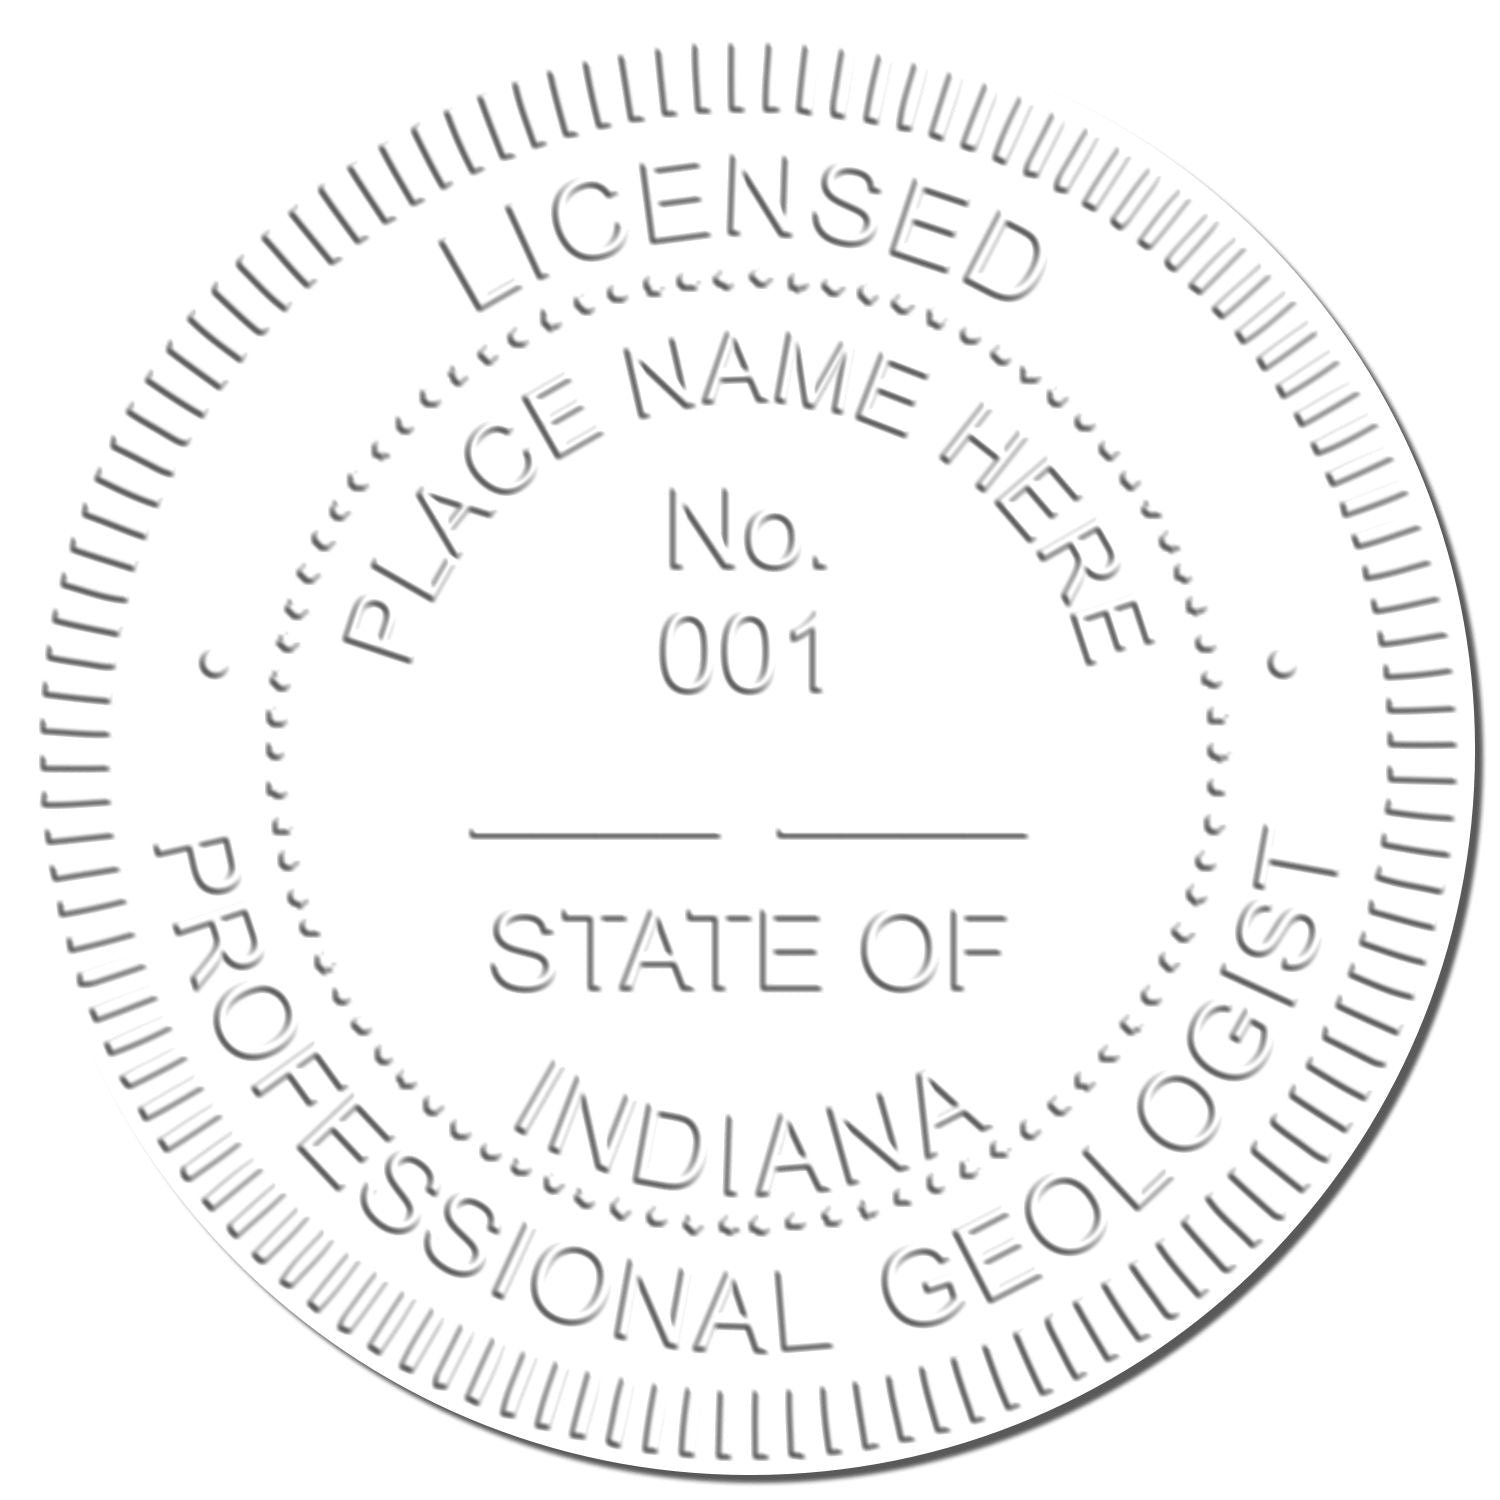 A stamped imprint of the Soft Indiana Professional Geologist Seal in this stylish lifestyle photo, setting the tone for a unique and personalized product.